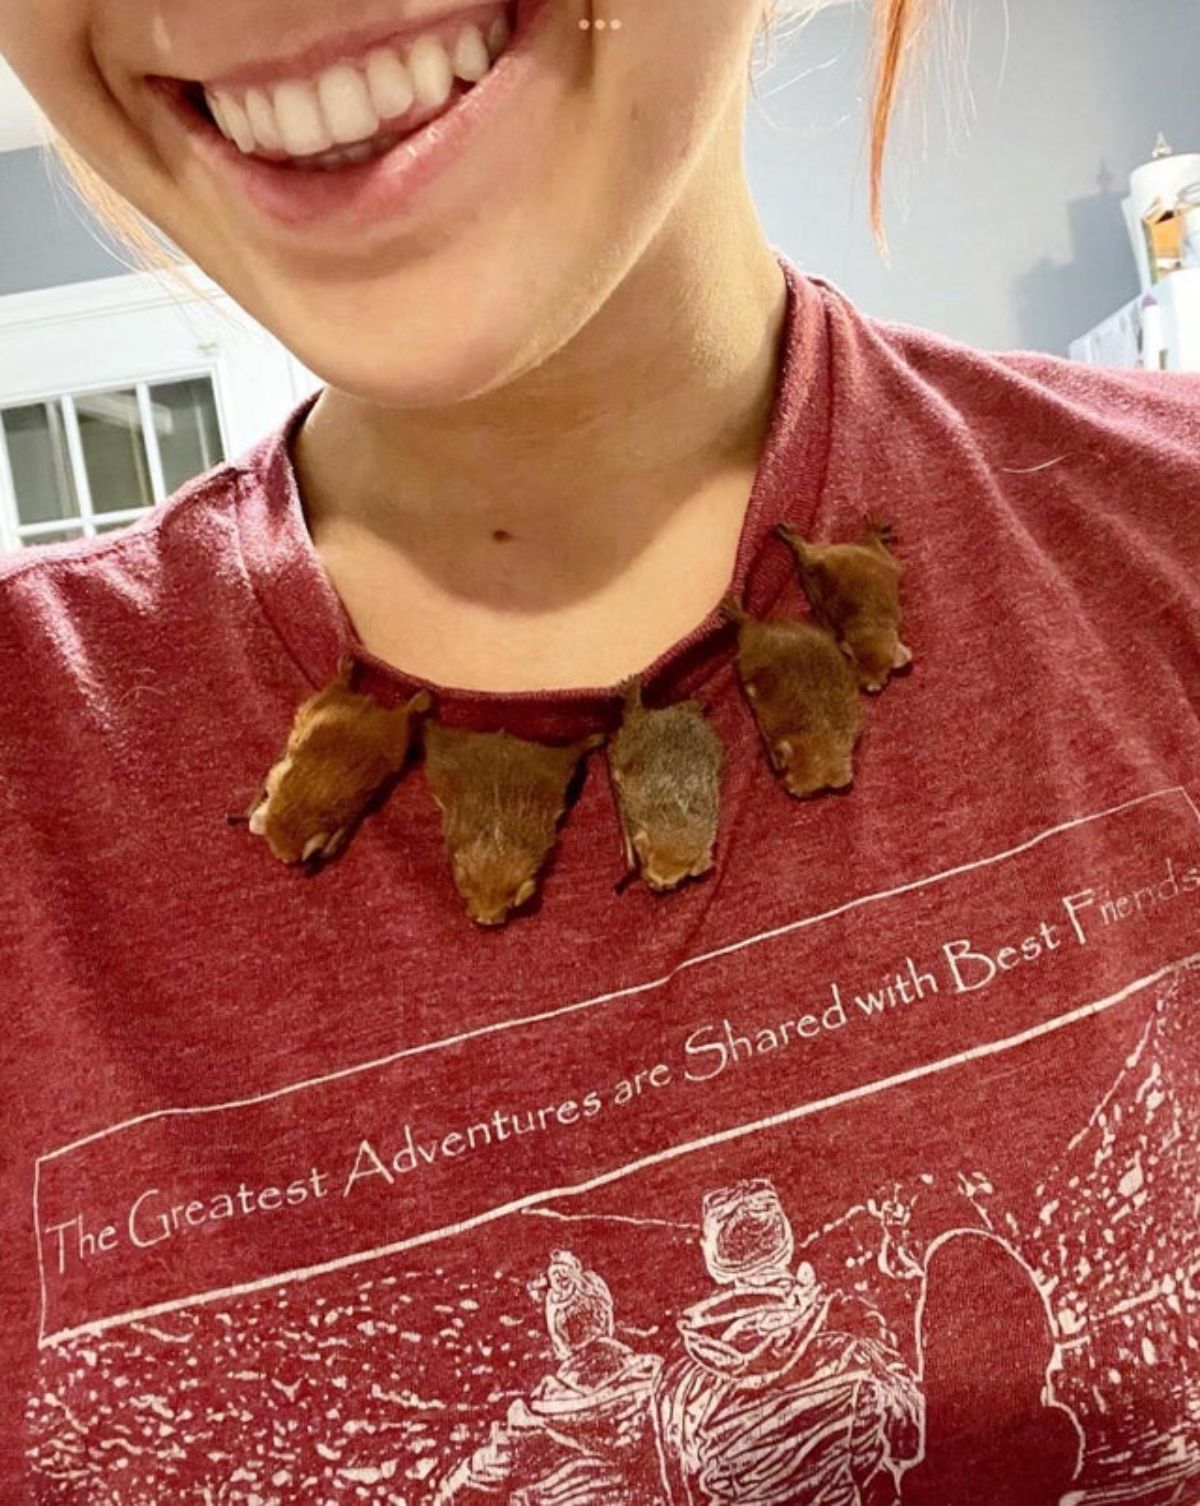 5 small bats hanging off of the collar of a red t shirt worn by a woman